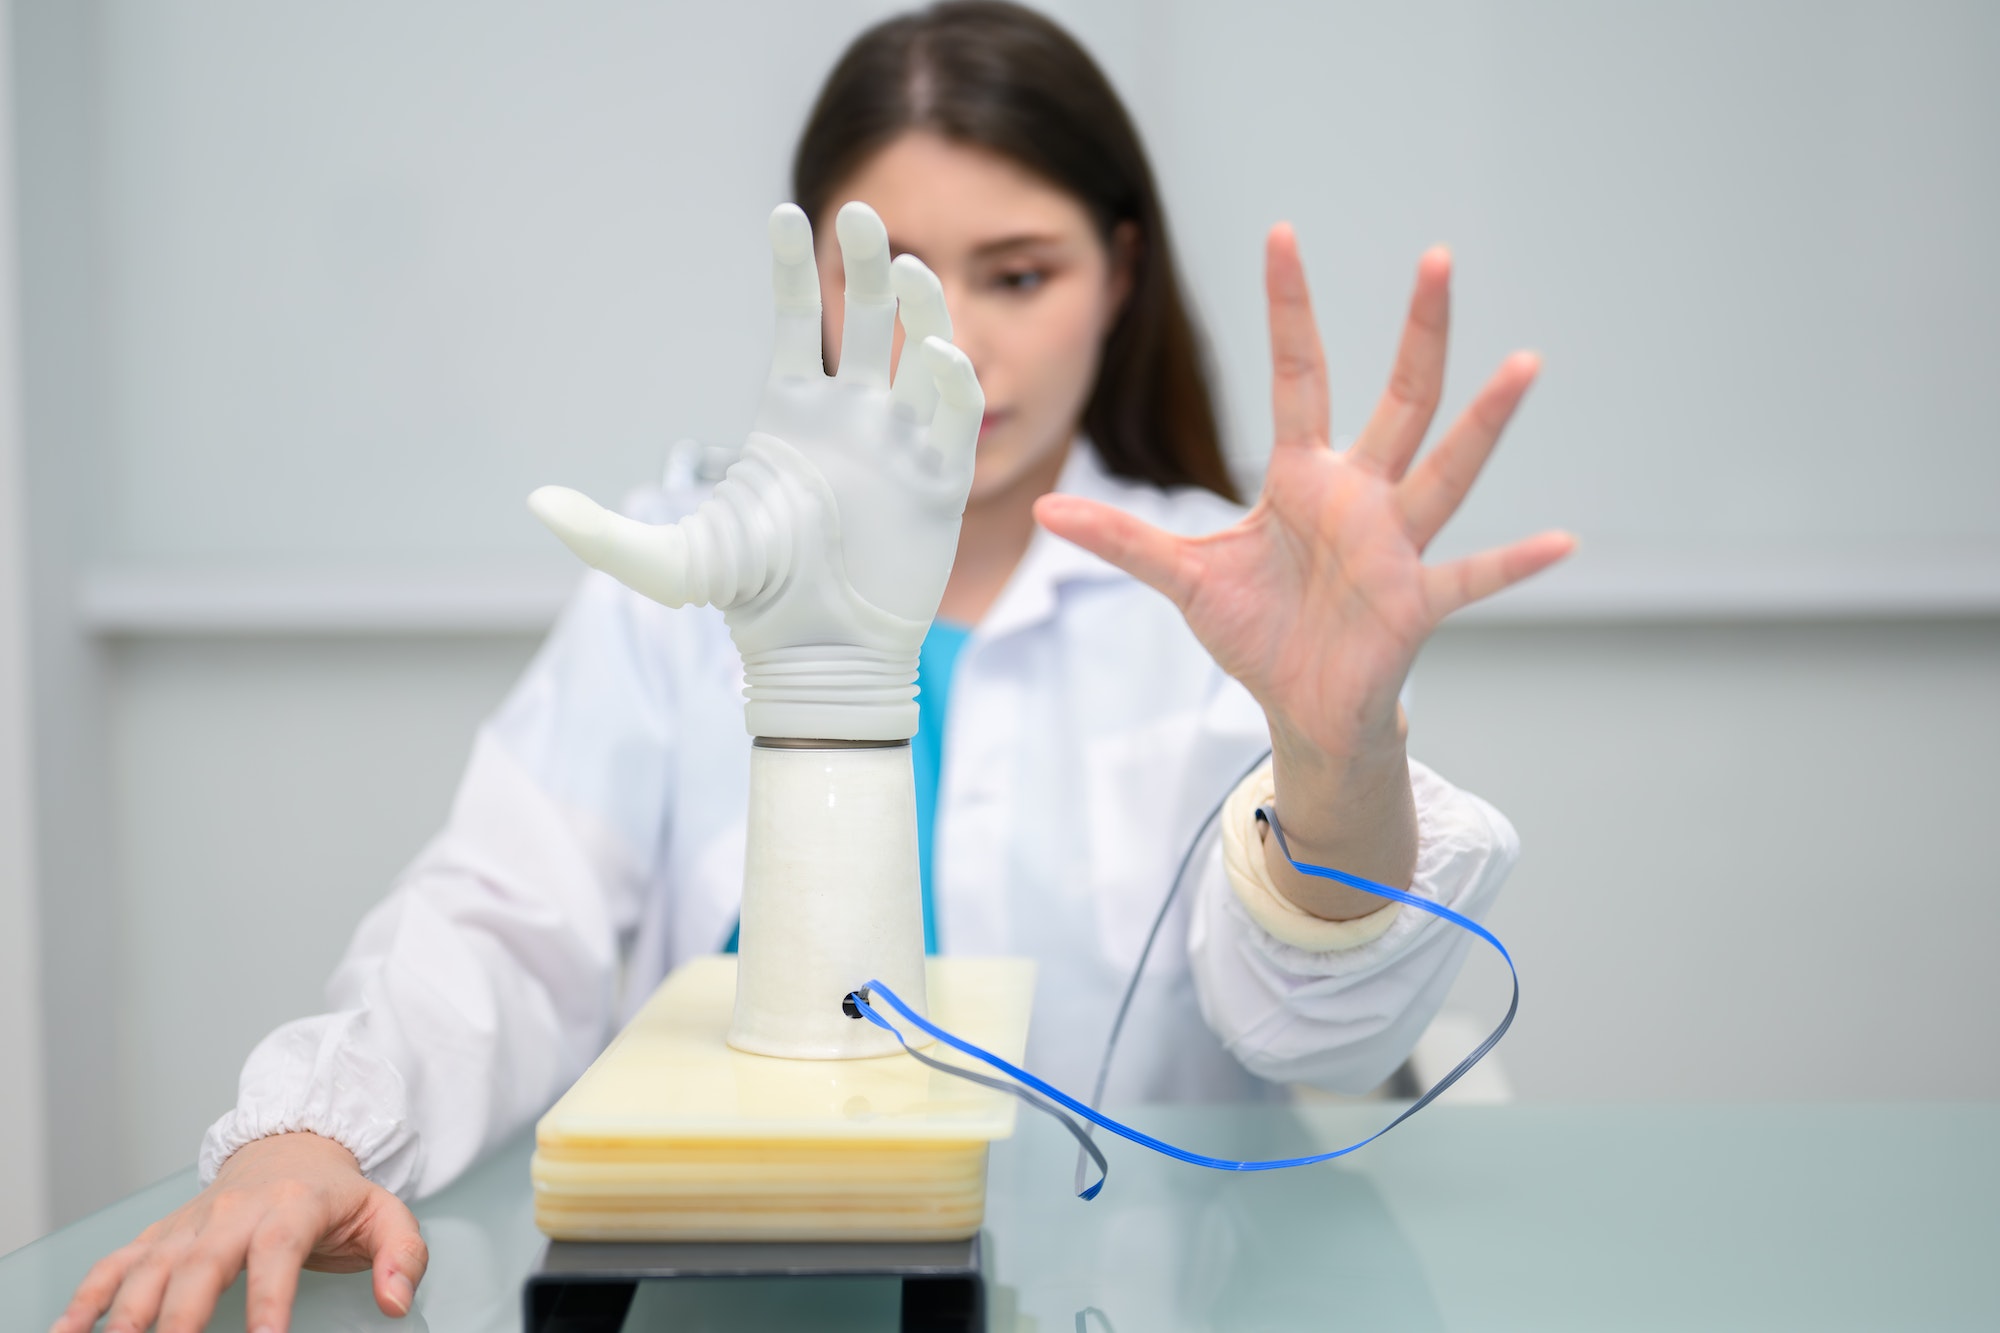 Technician testing robotic bionic arm at prosthetic manufacturing